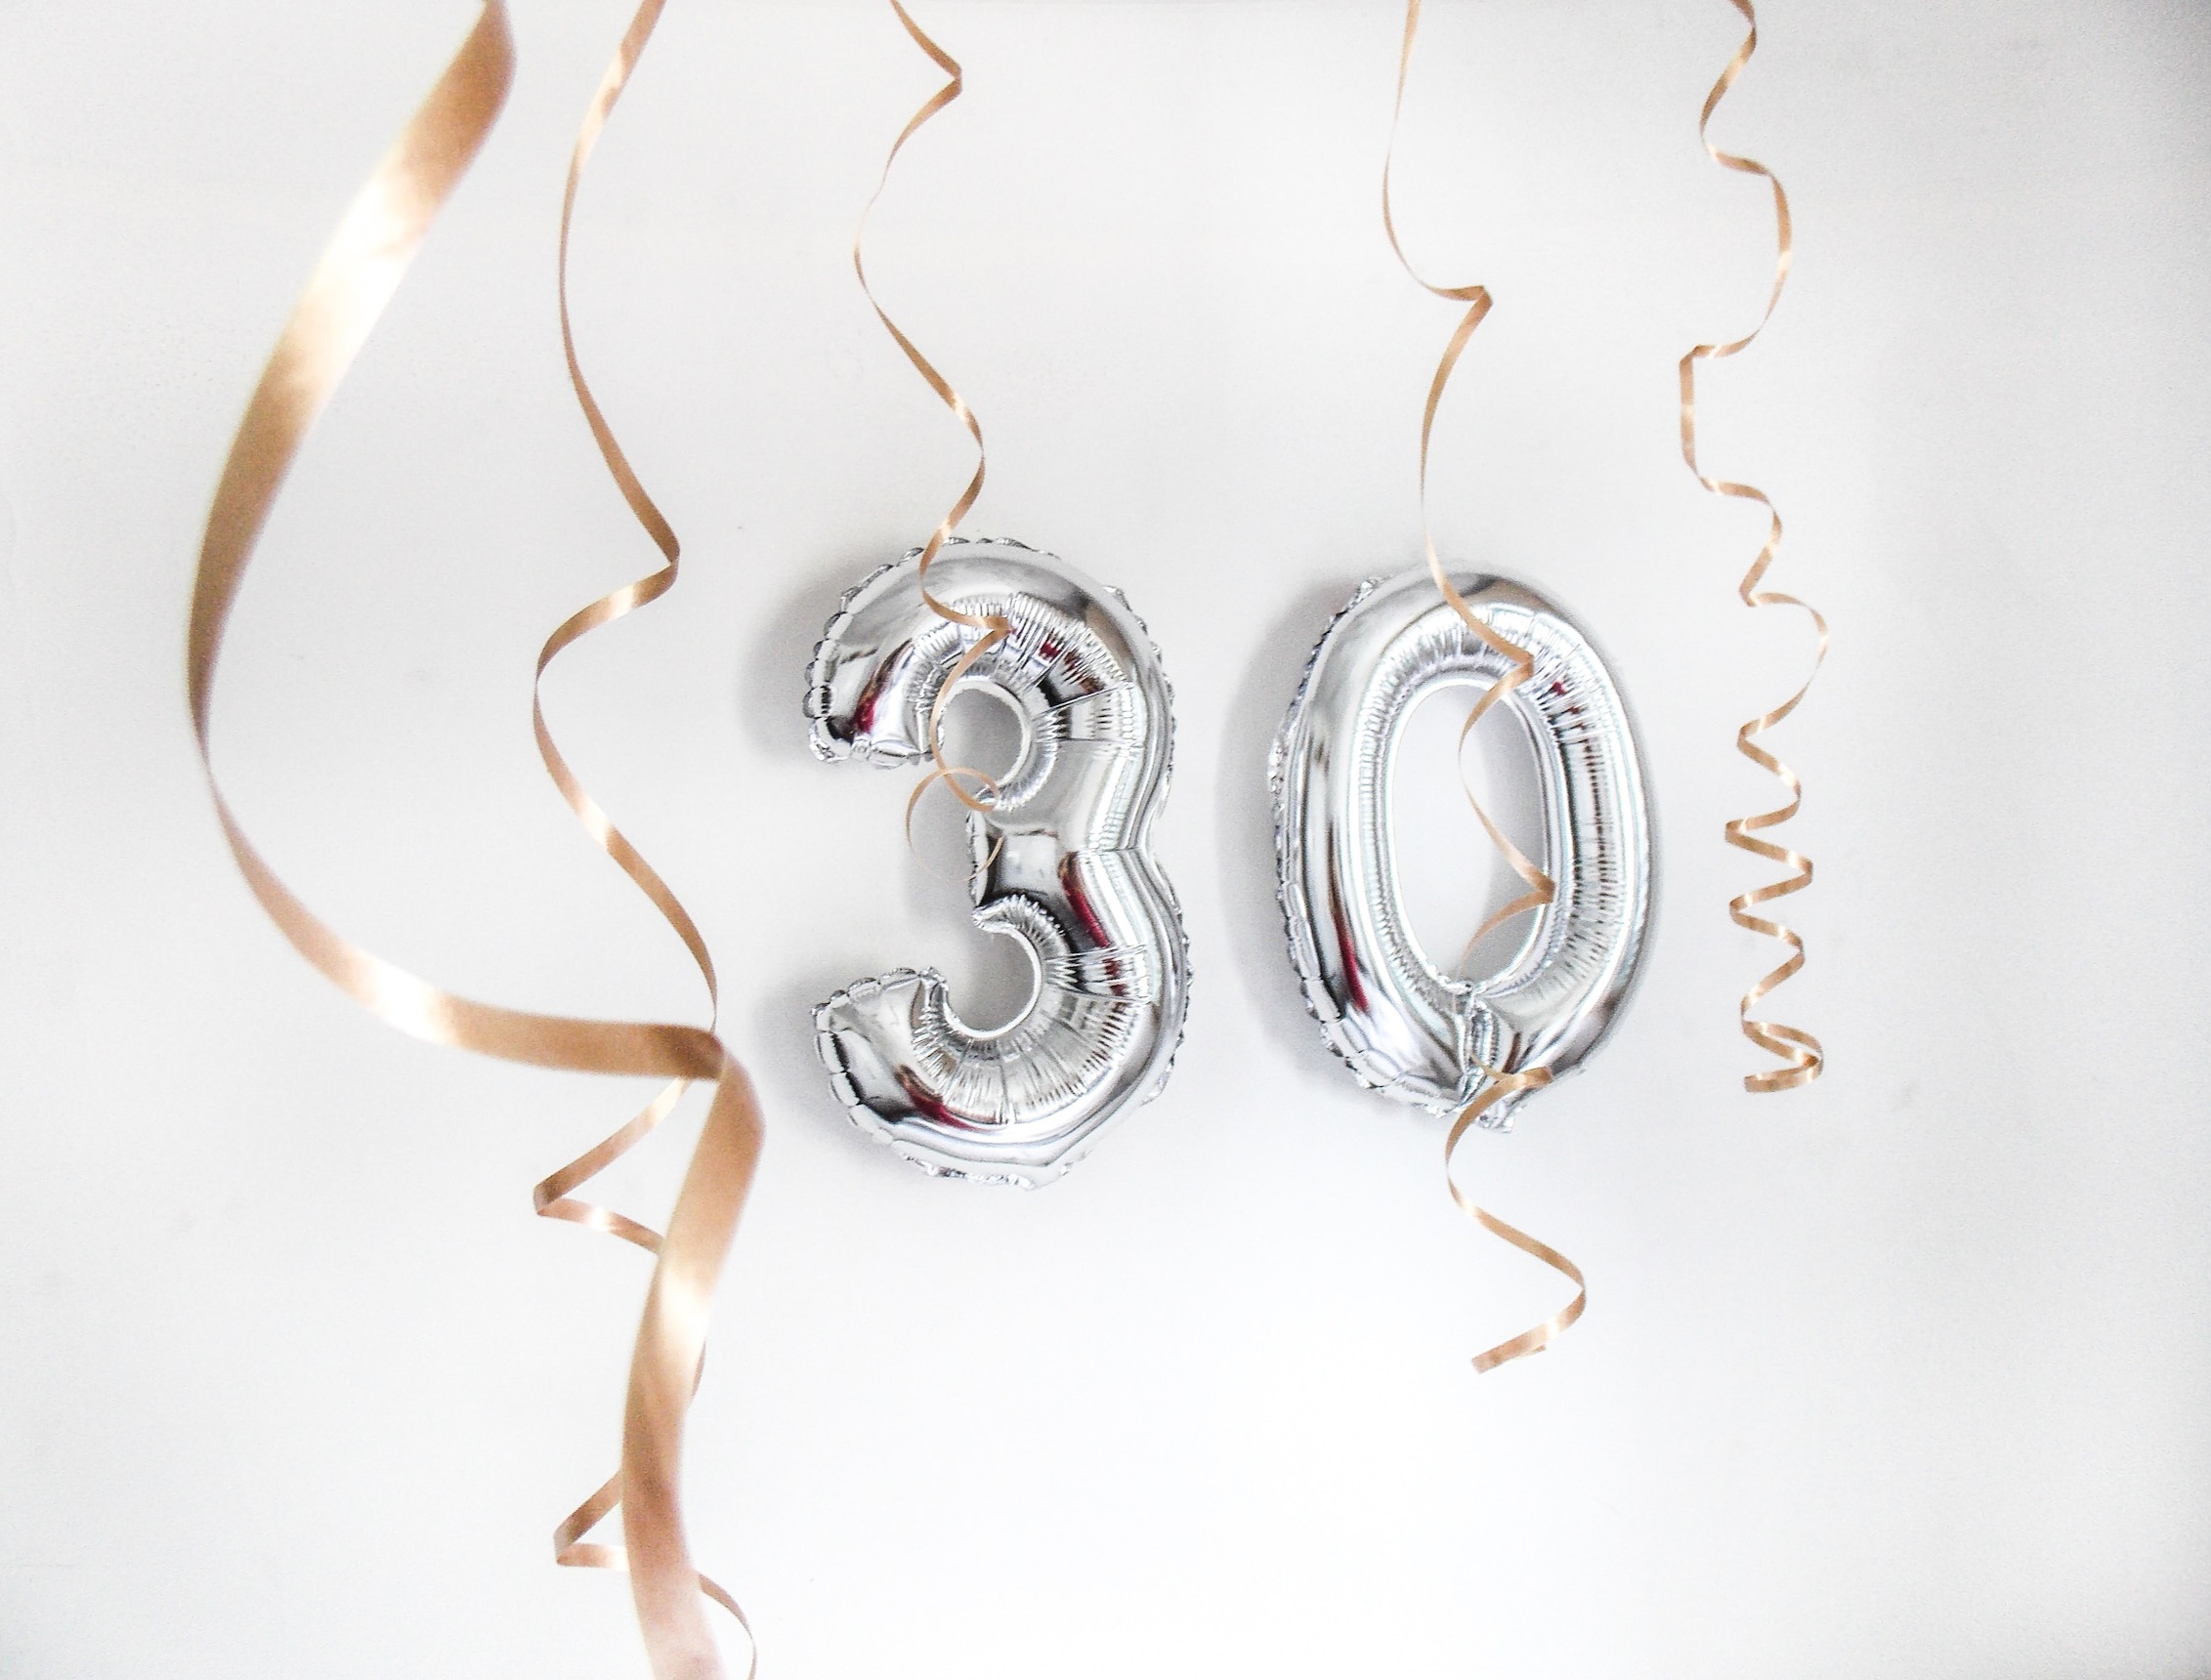 30th birthday celebration image of two silver balloons shaped as a three and zero, with gold spirals of ribbon floating above and through it. The image is from a free stock site called Unsplash and was taken by photographer Marina Barcelos.